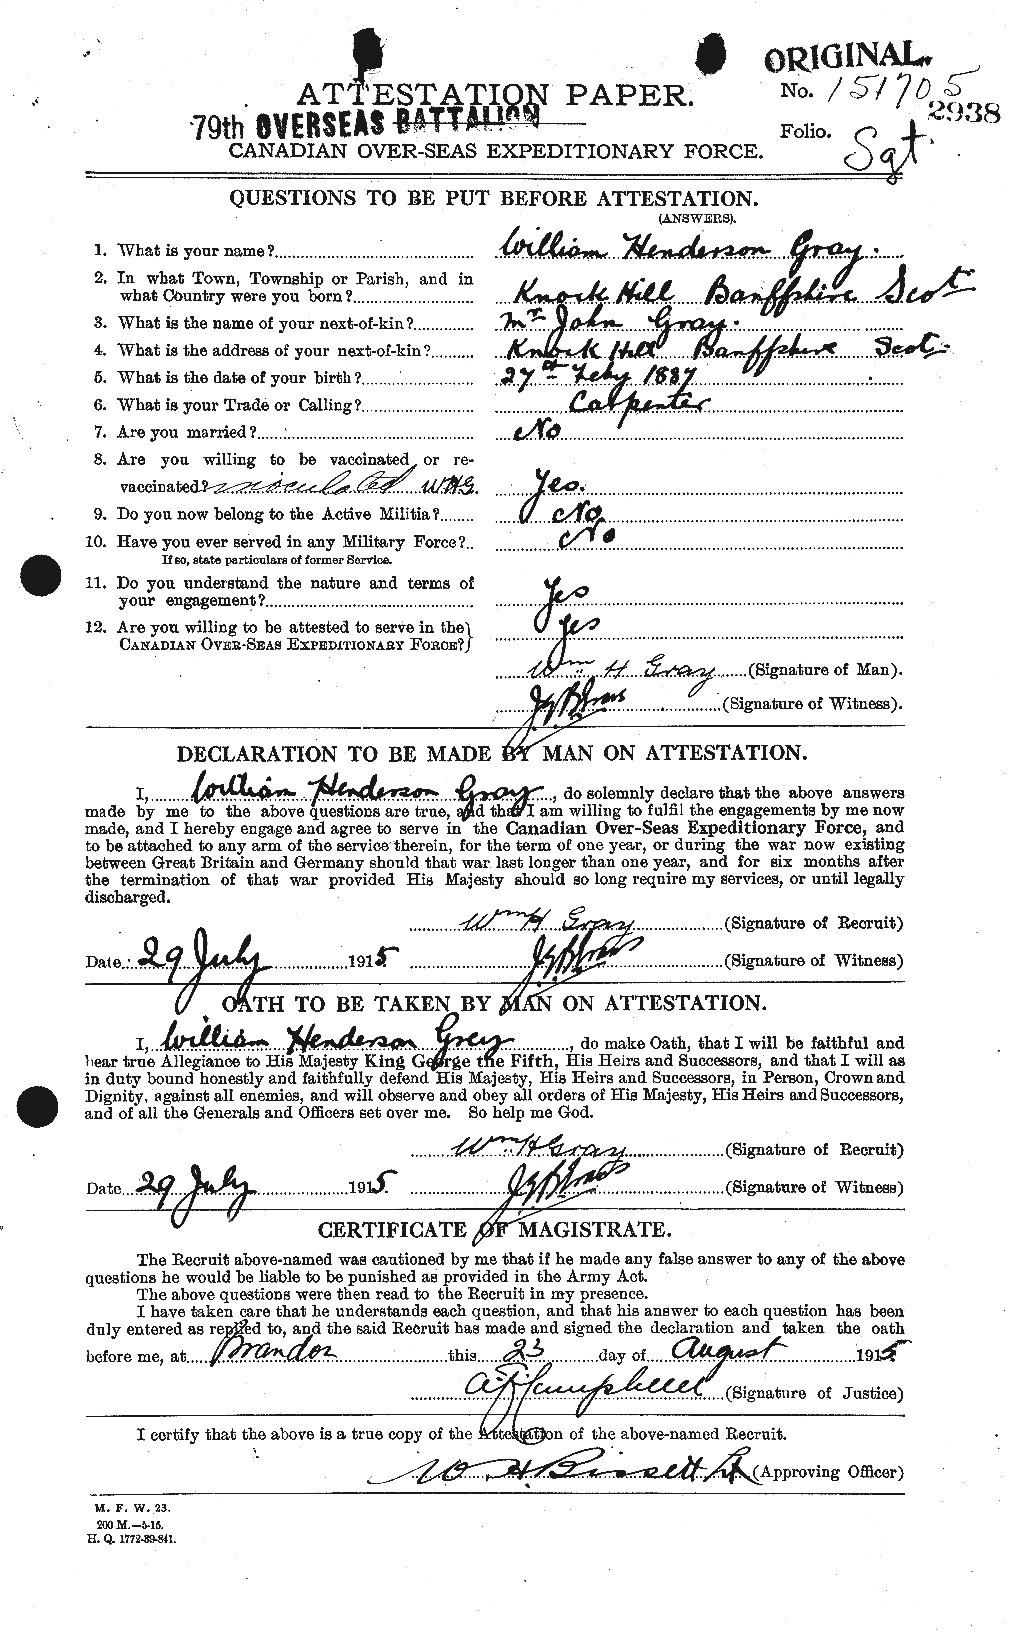 Personnel Records of the First World War - CEF 361824a